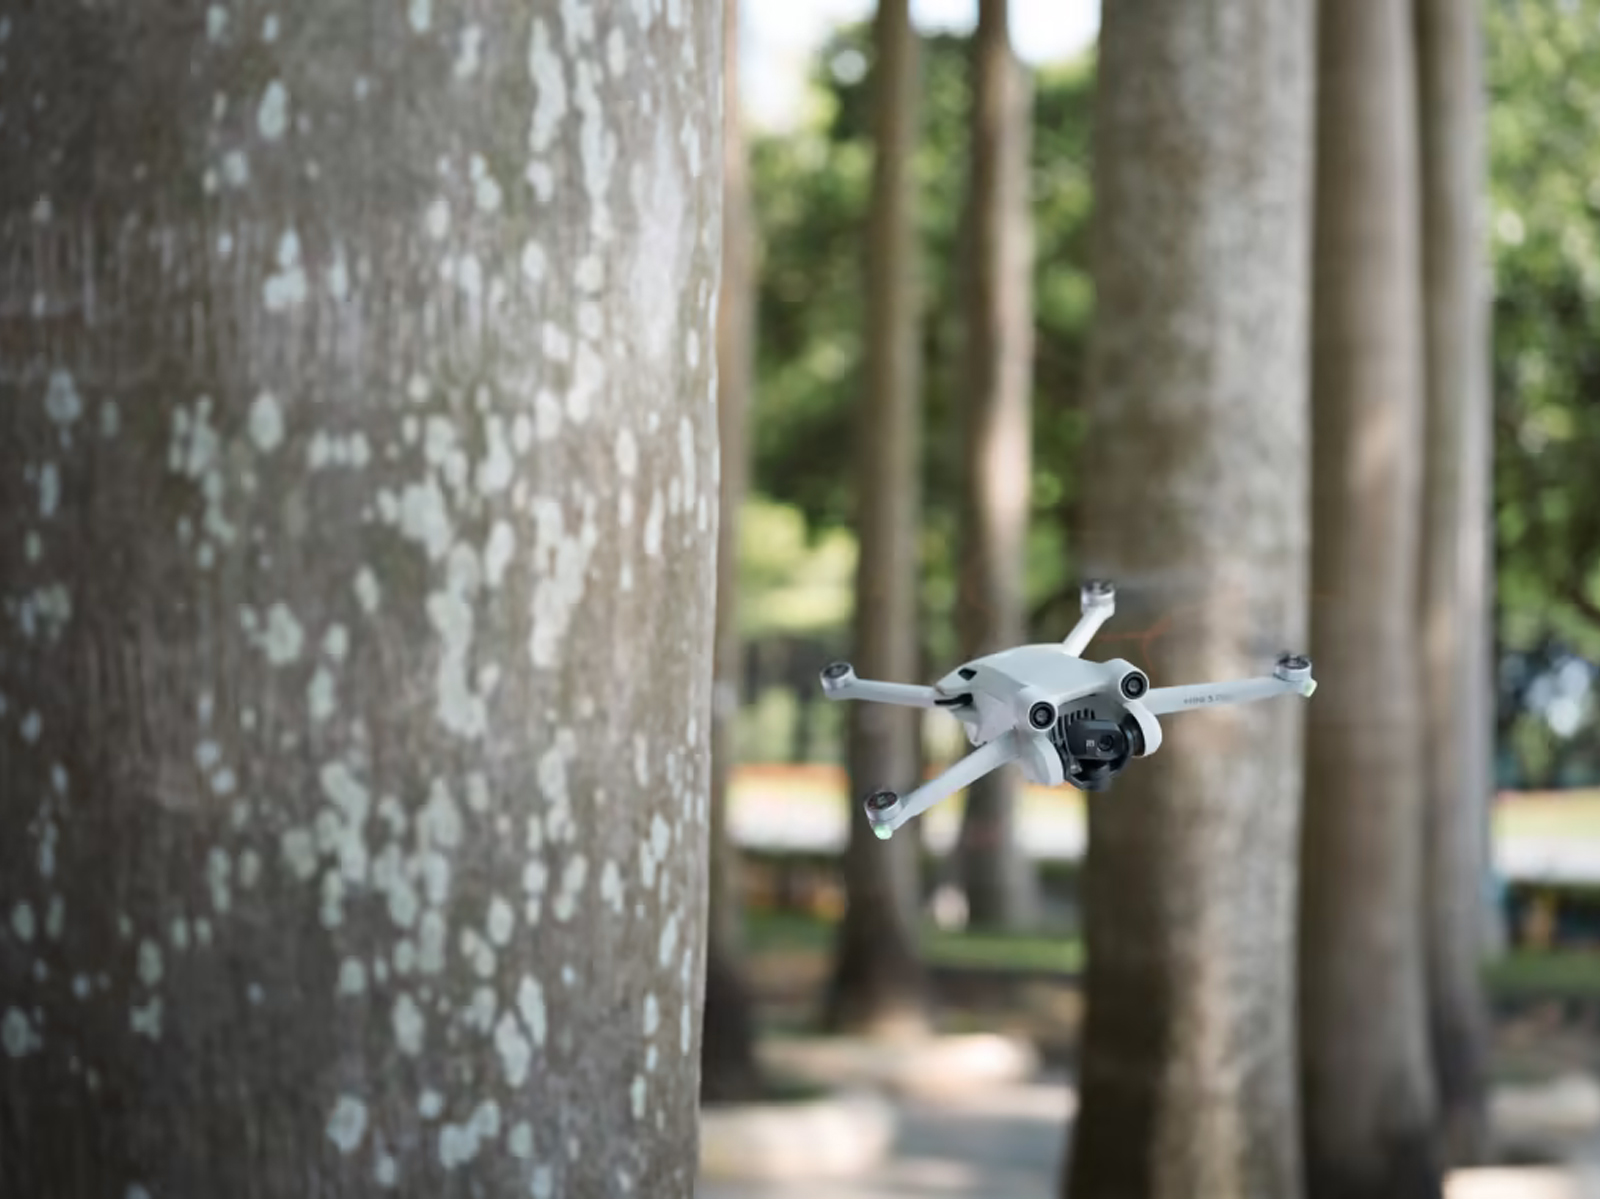 DJI Avatar: DJI Brings New, Smaller Drone With First Person View